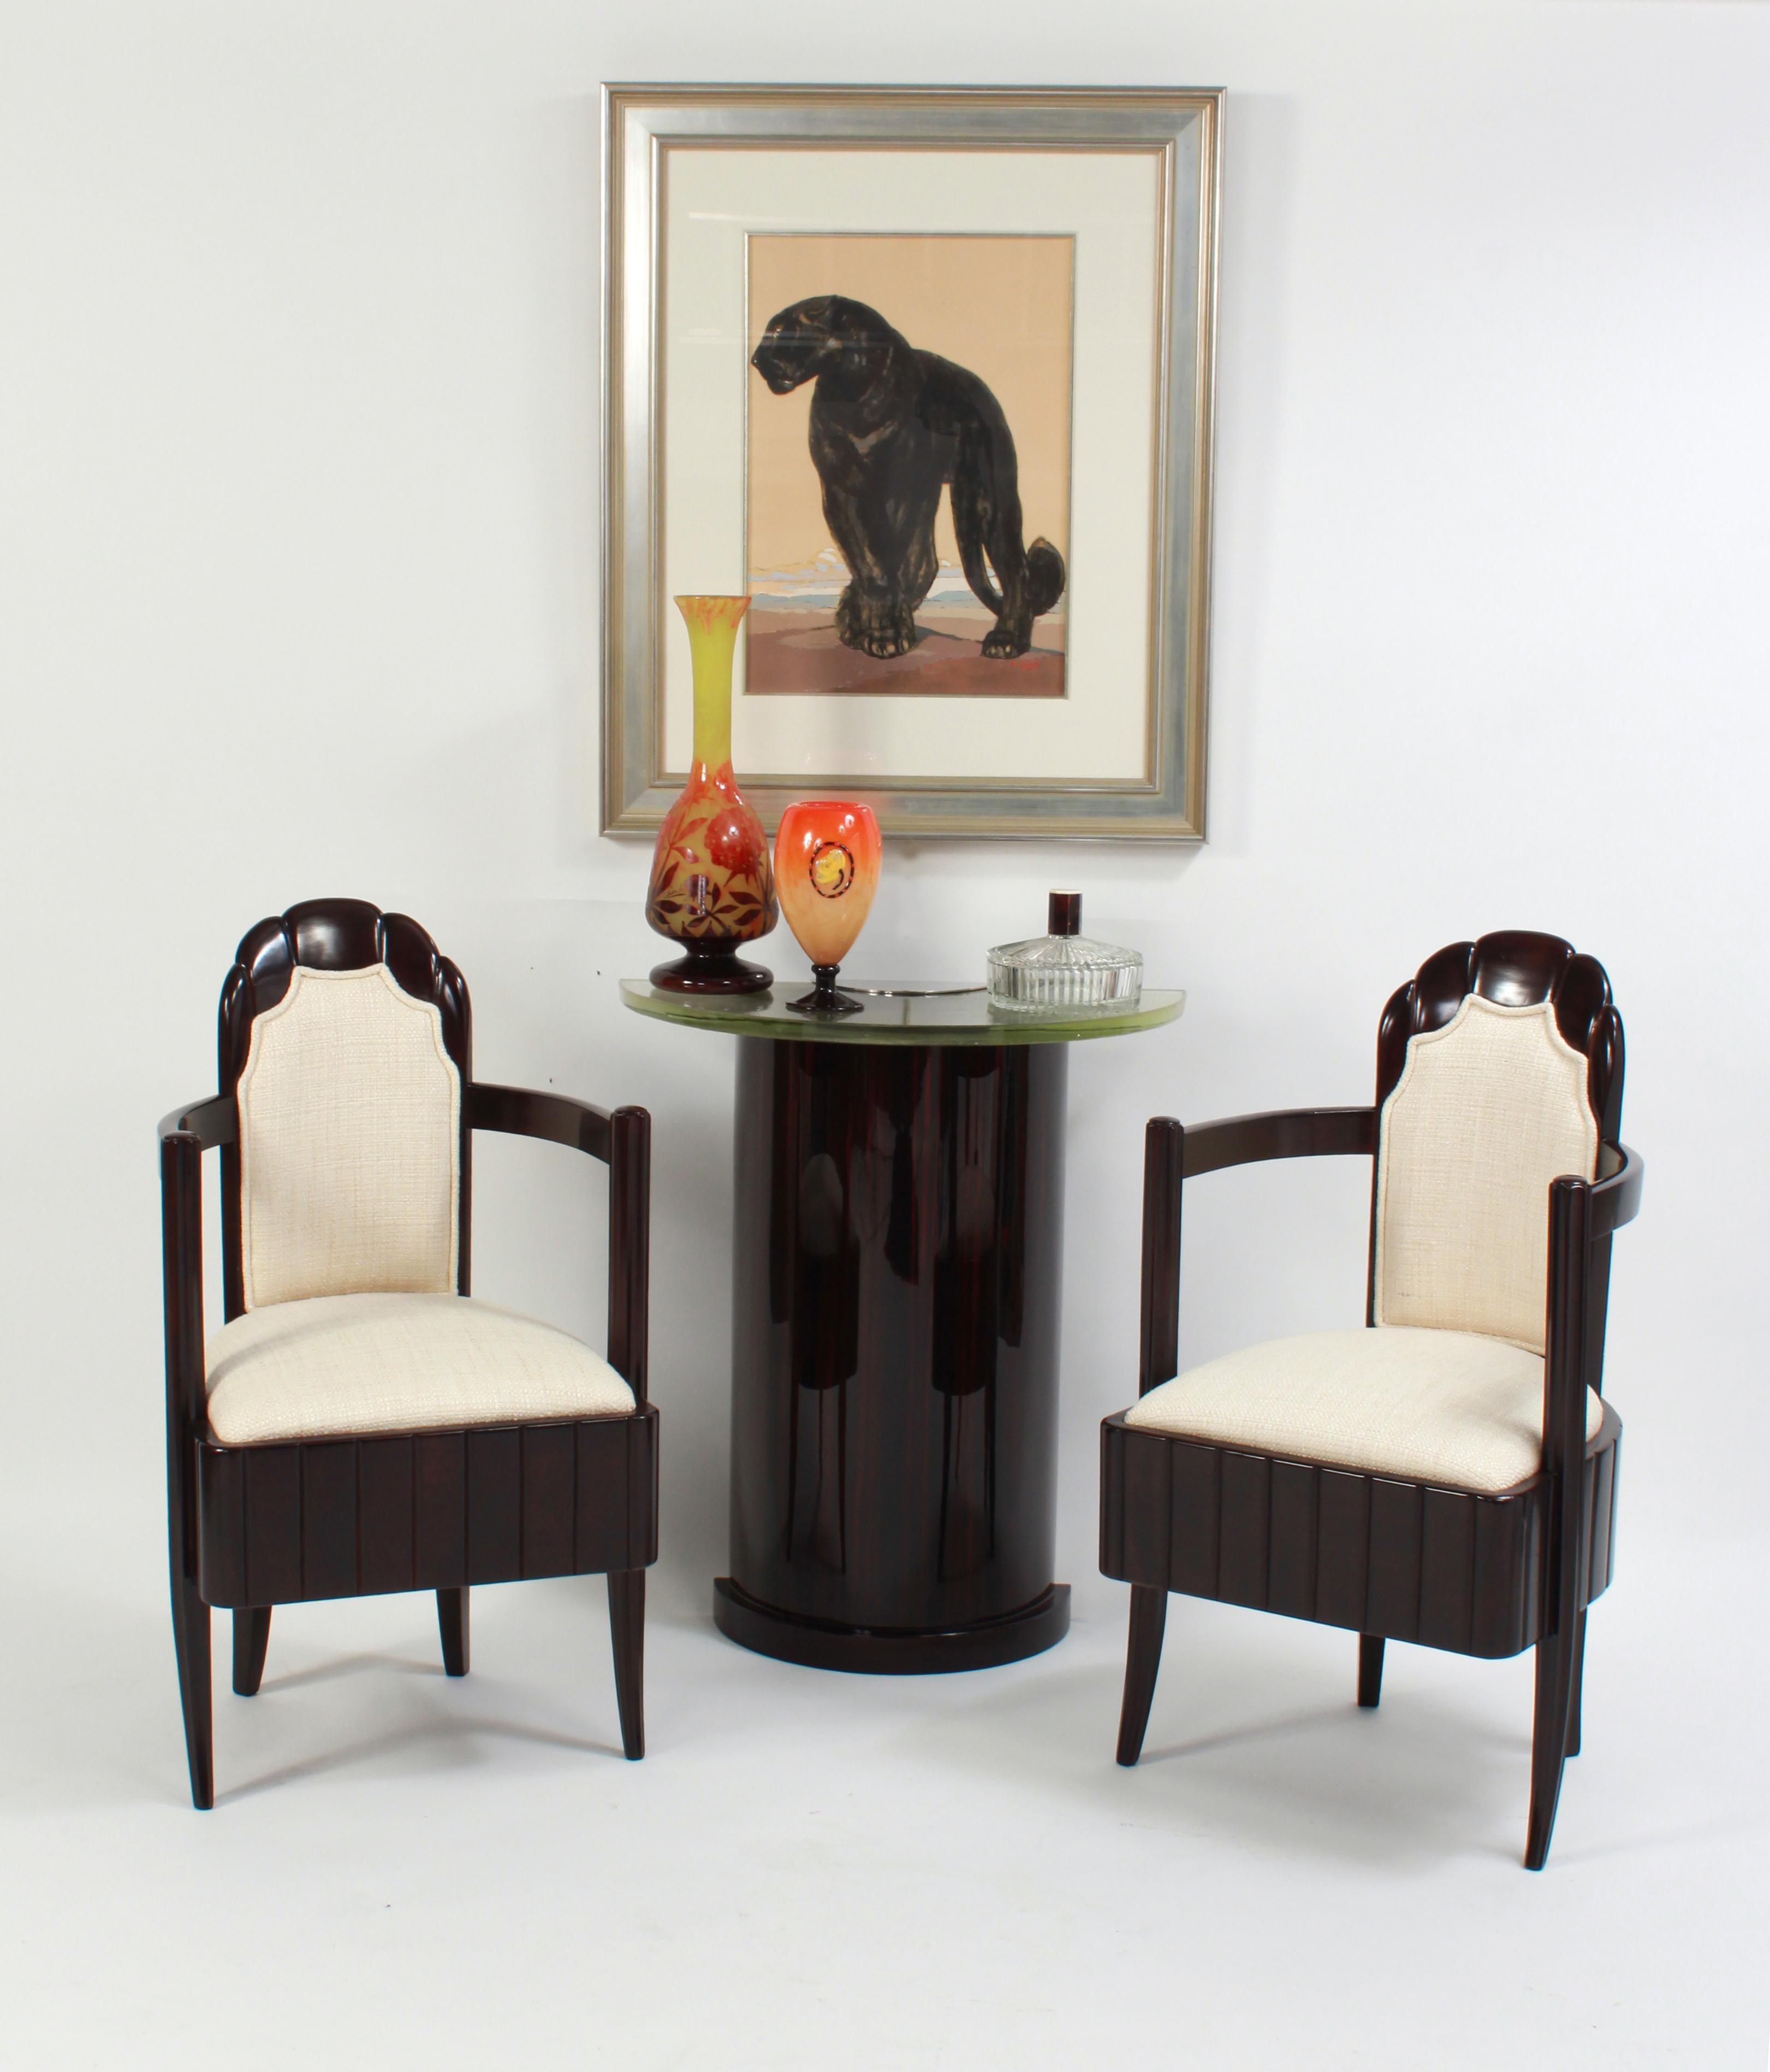 Pair of Art Deco solid mahogany armchairs designed by Pierre Patout and H. Pacon for the French ocean liner Île-de-France.
Made in France,
circa 1930
Reference: Art Deco by Pierre Kjellerg, page 262.